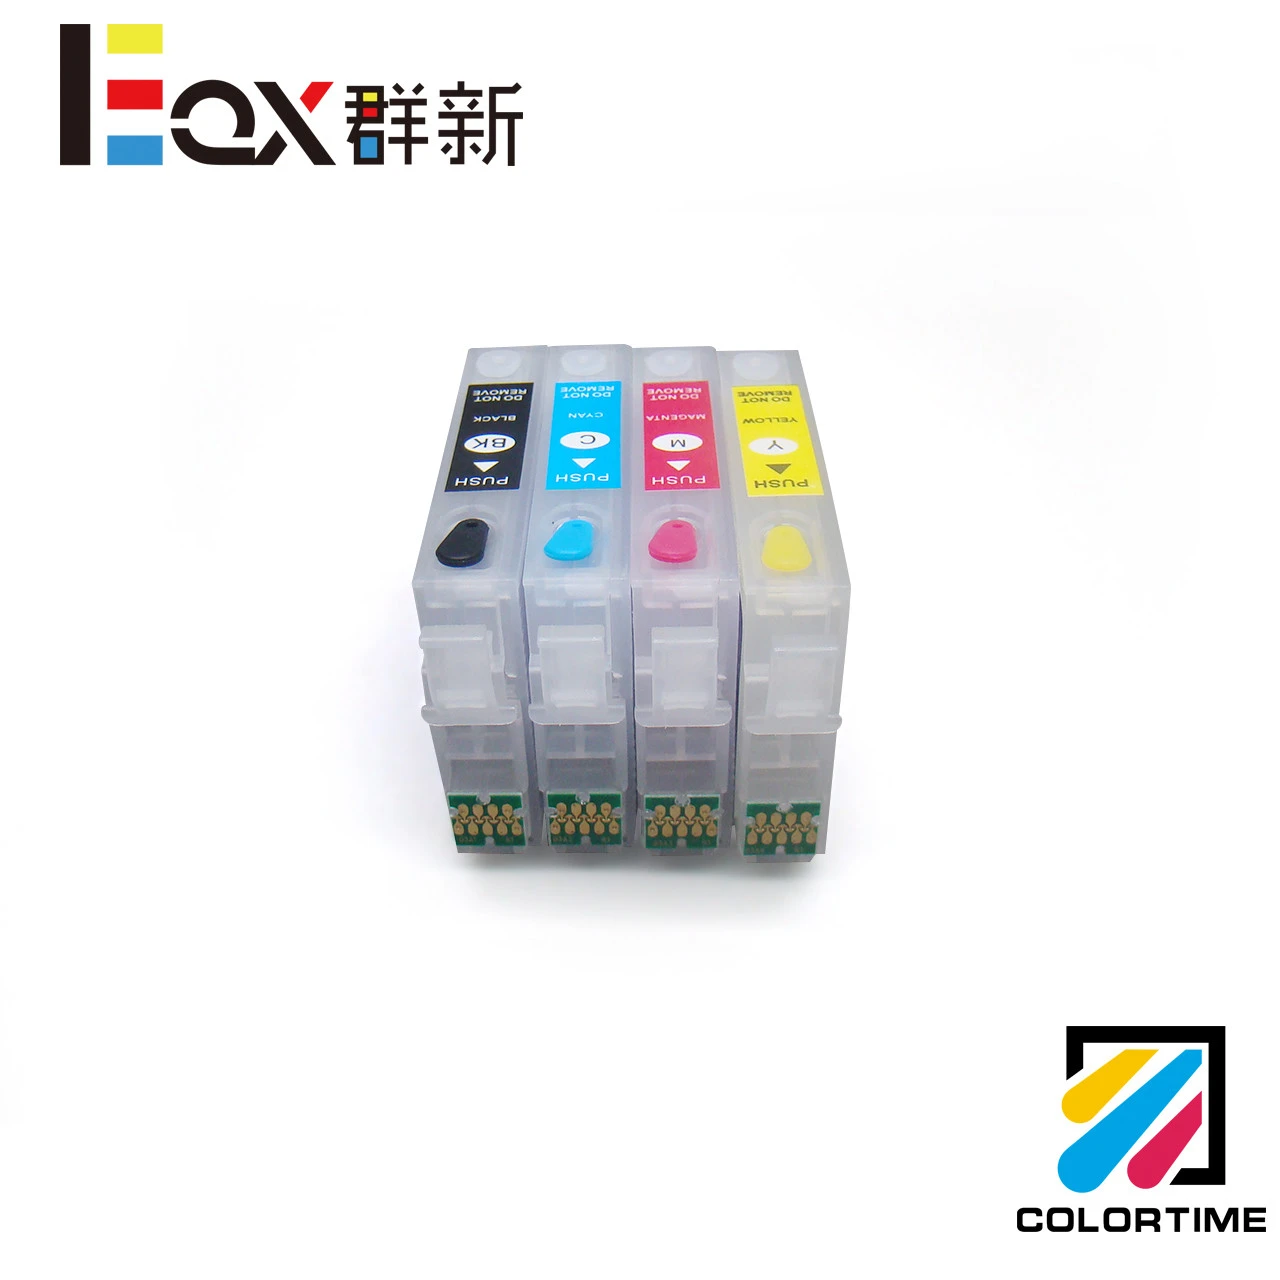 603XL Refill Ink Cartridge With Arc  For Epson XP-2100 XP-2105 XP-3100 XP-3105 XP-4100 XP-4105 WF-2810 WF-2830 WF-2835 WF-2850